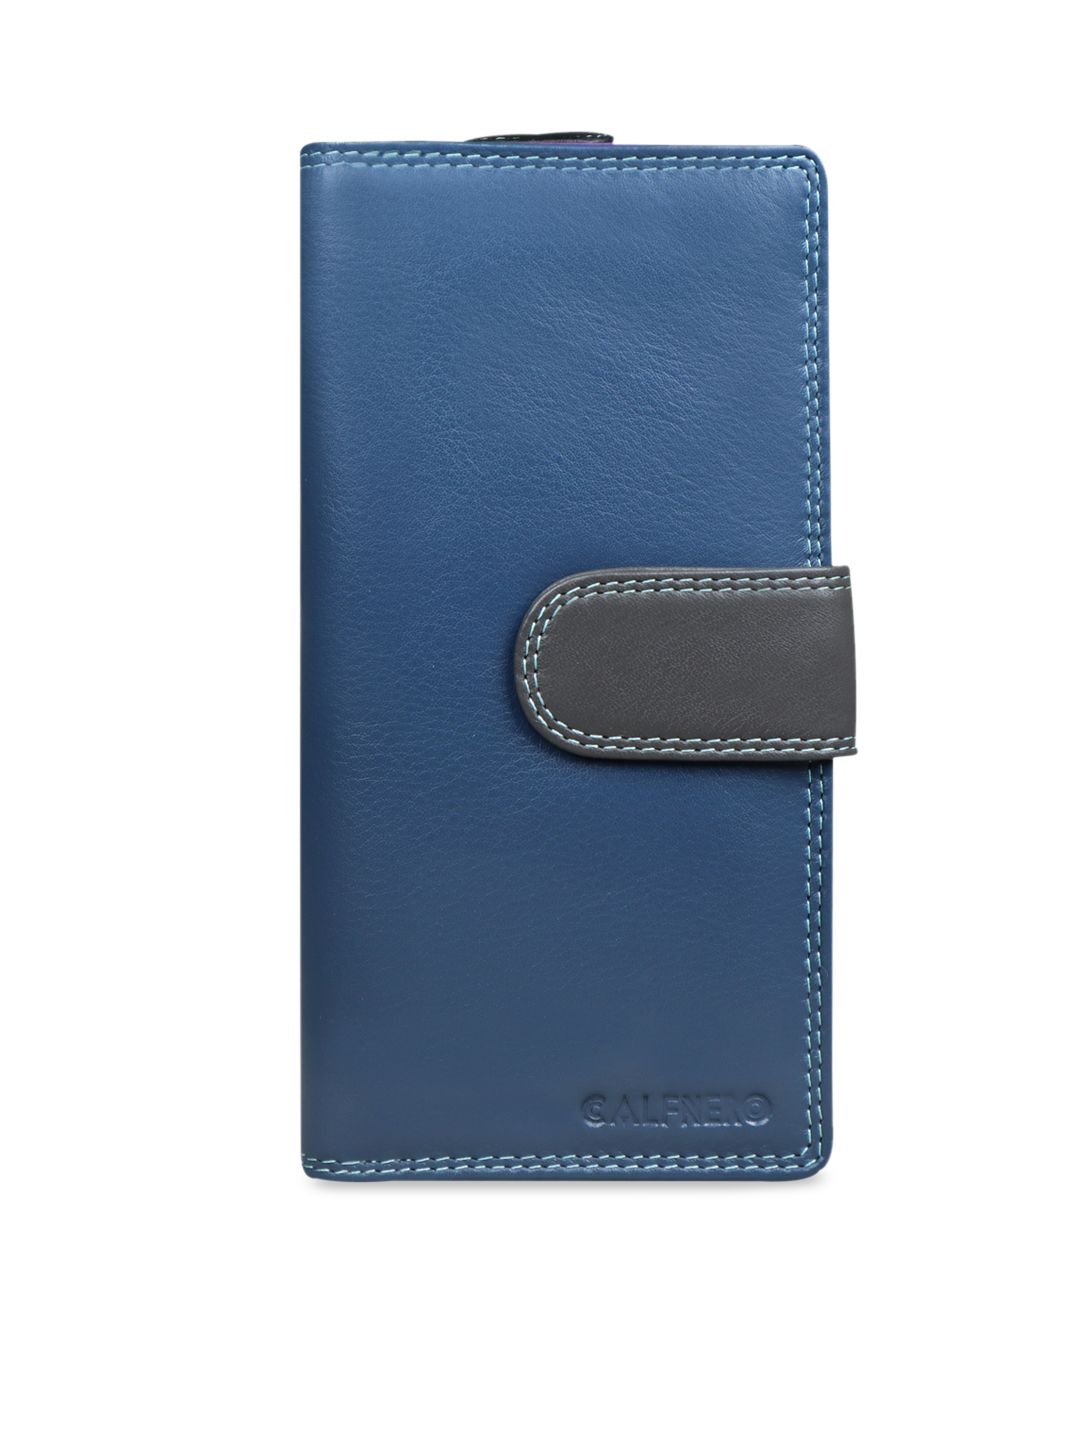 CALFNERO Women Blue Colourblocked Leather Two Fold Wallet Price in India